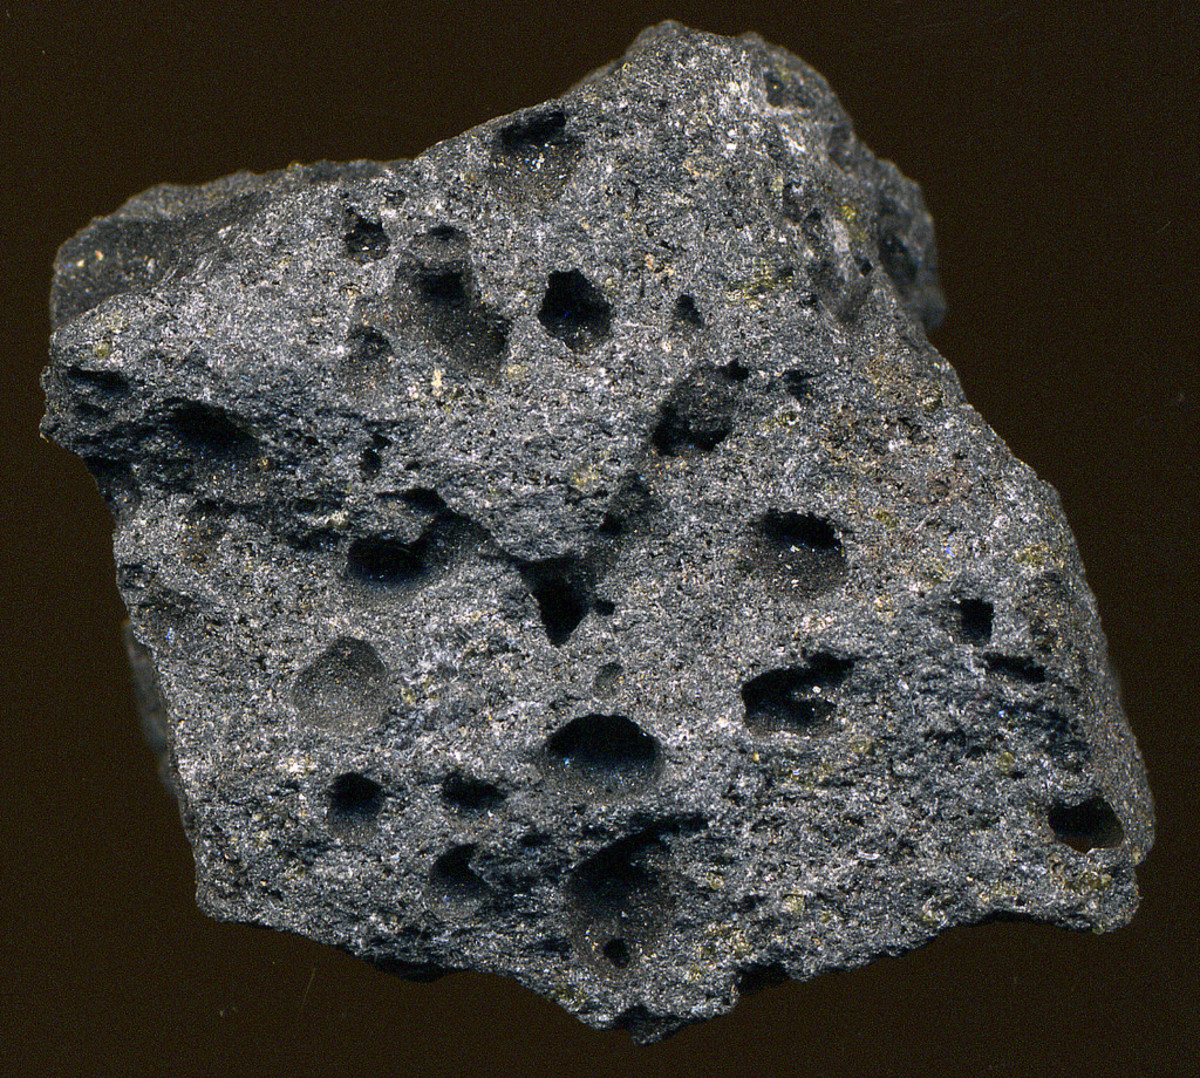 Basalt is also known as lava rock.